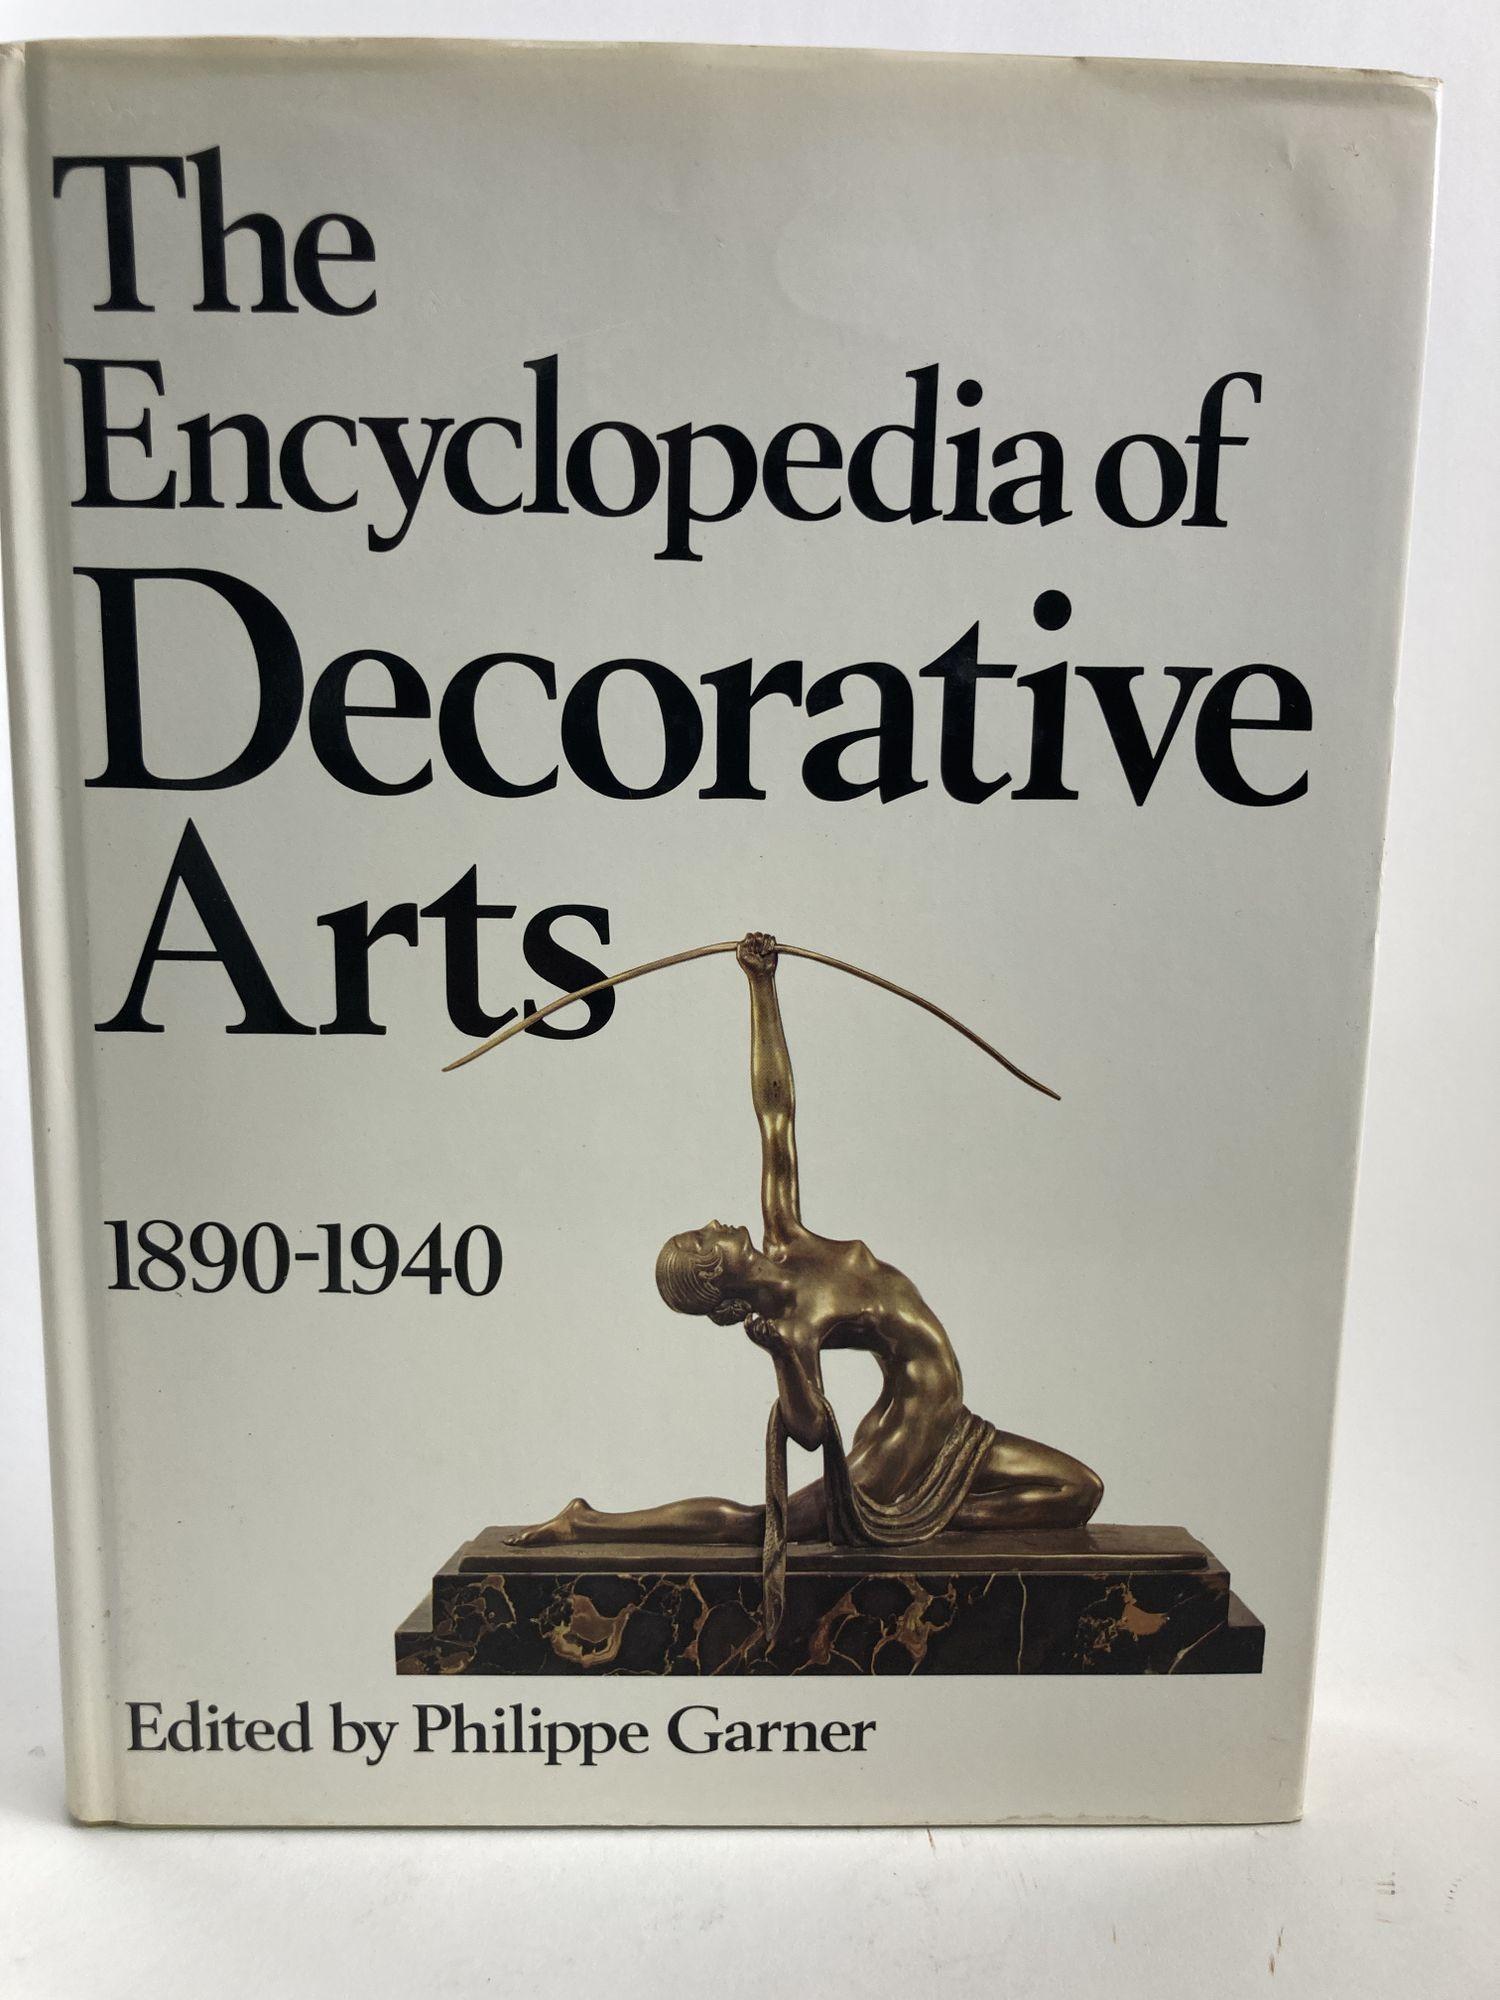 Encyclopedia of Decorative Arts, 1890-1940 1st Edition 1978 For Sale 12